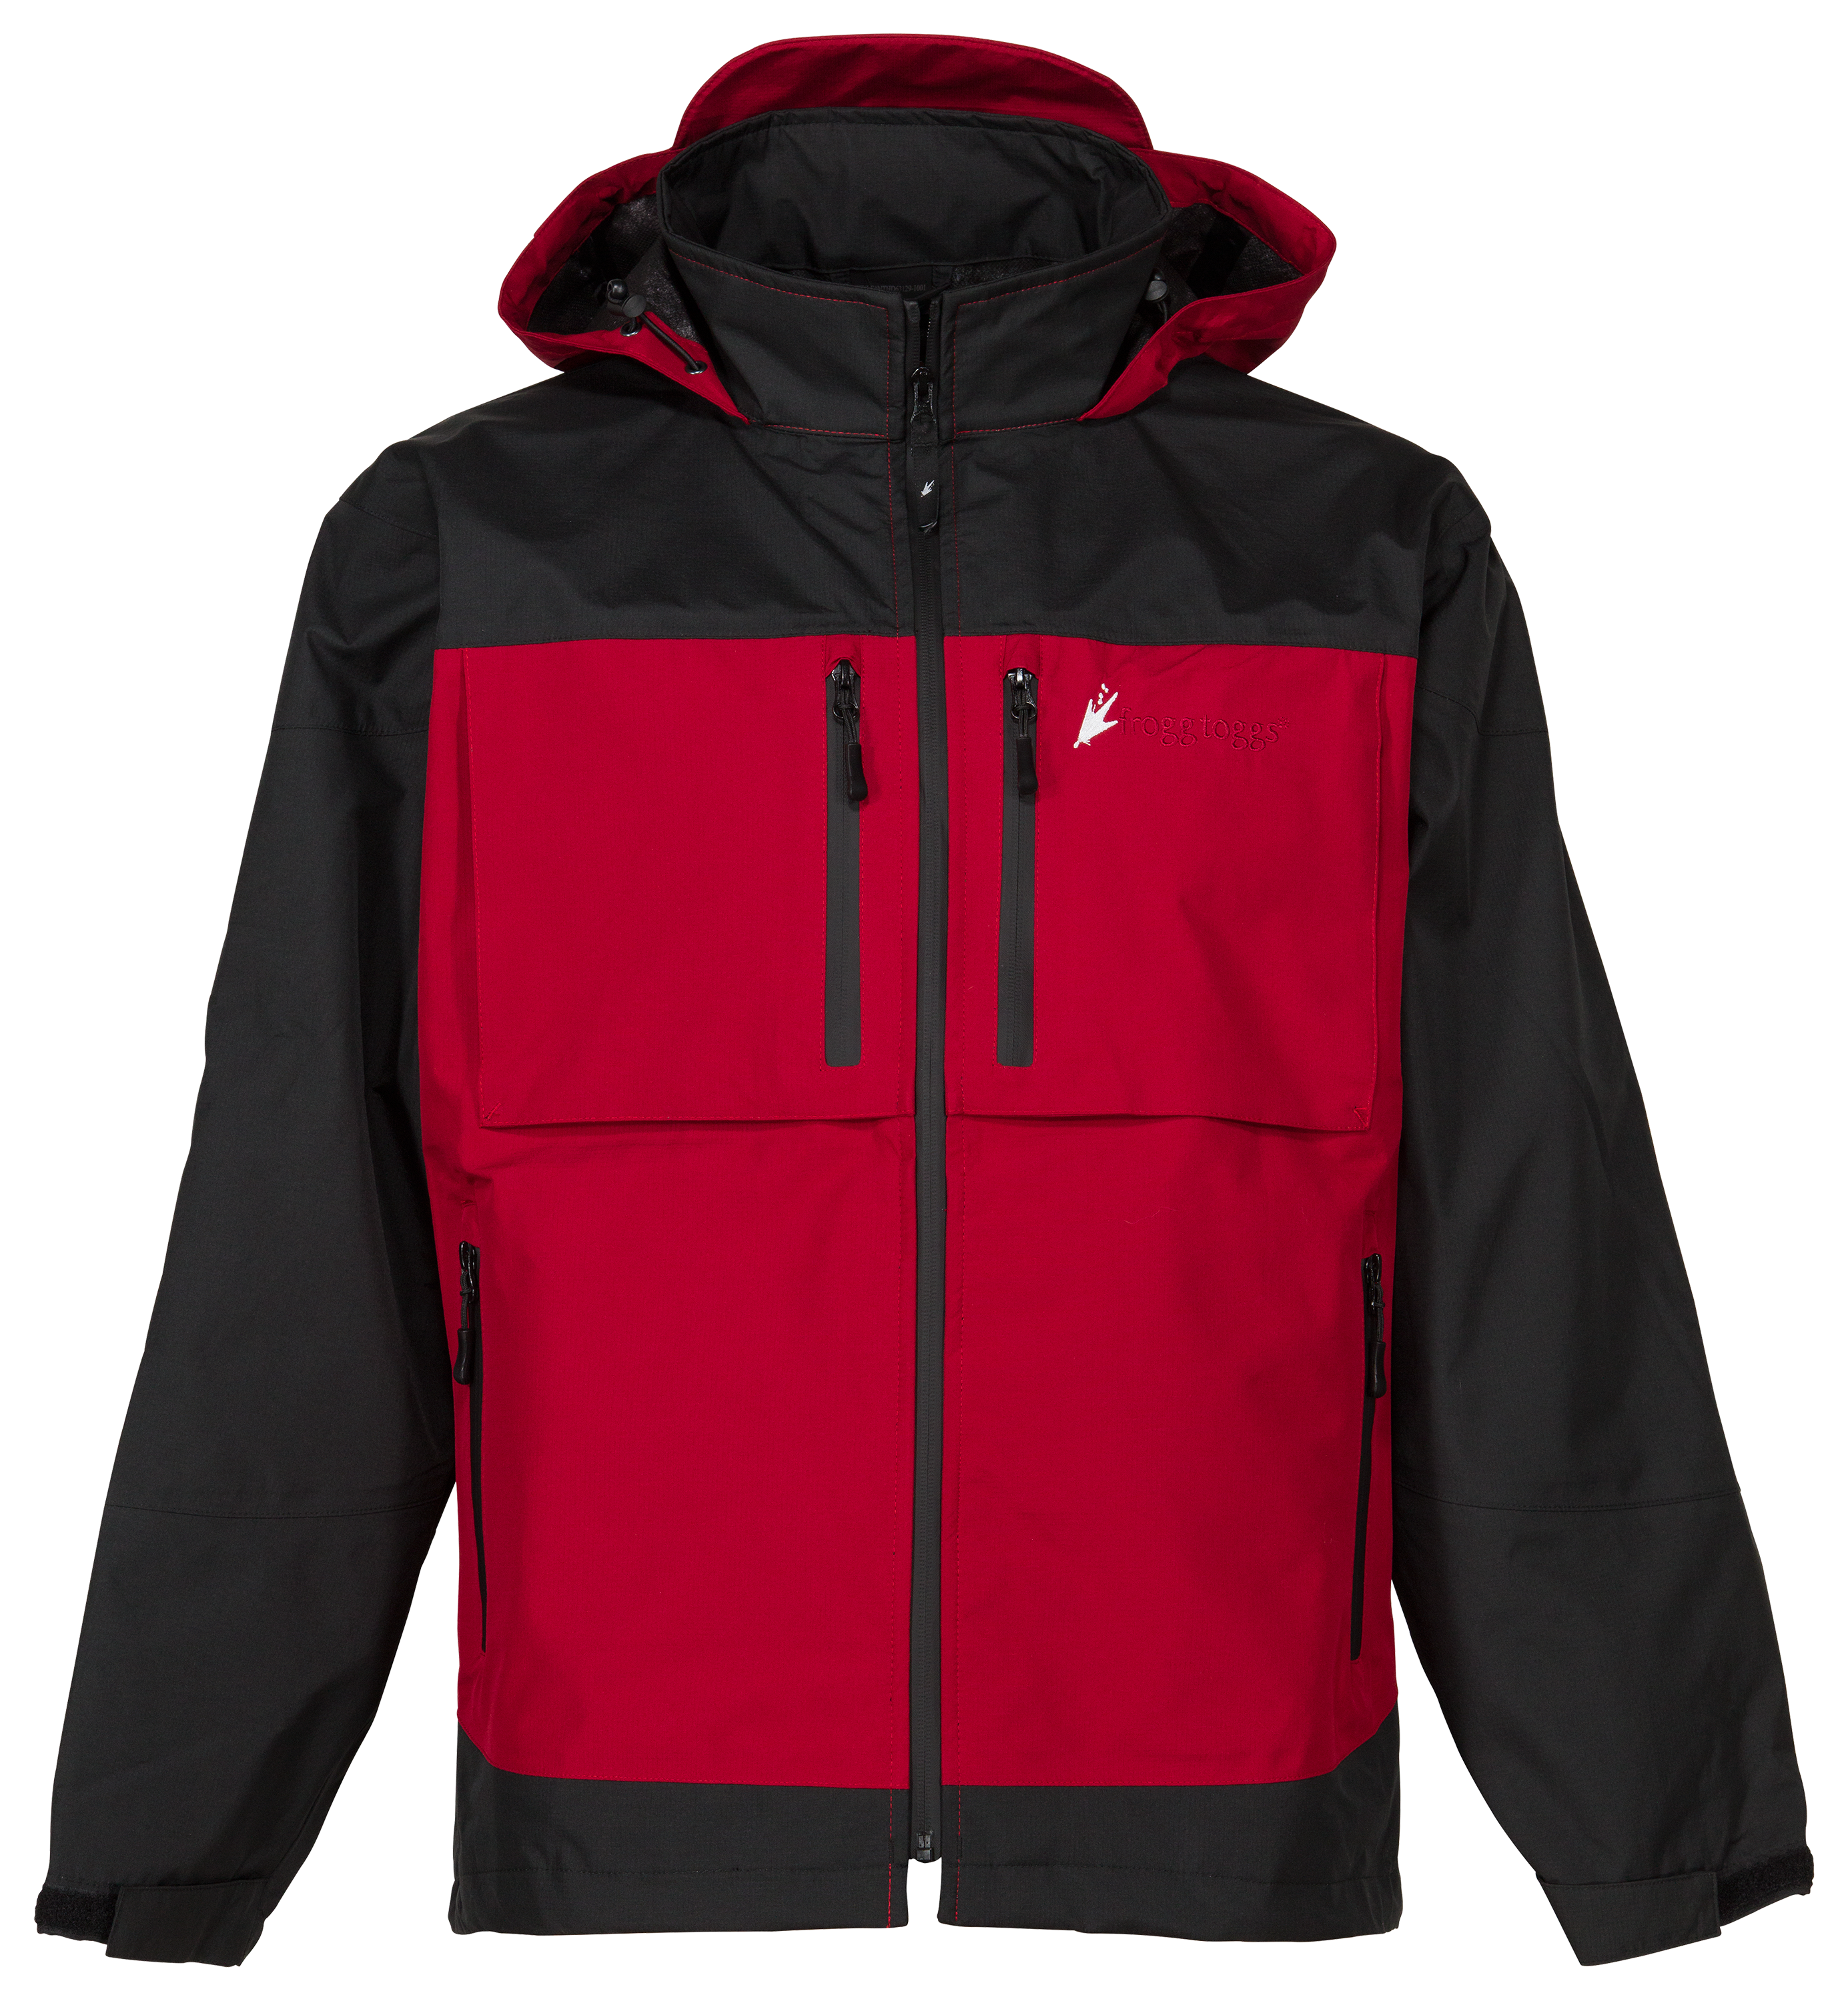 frogg toggs Road Toad Reflective Rain Jacket for Men